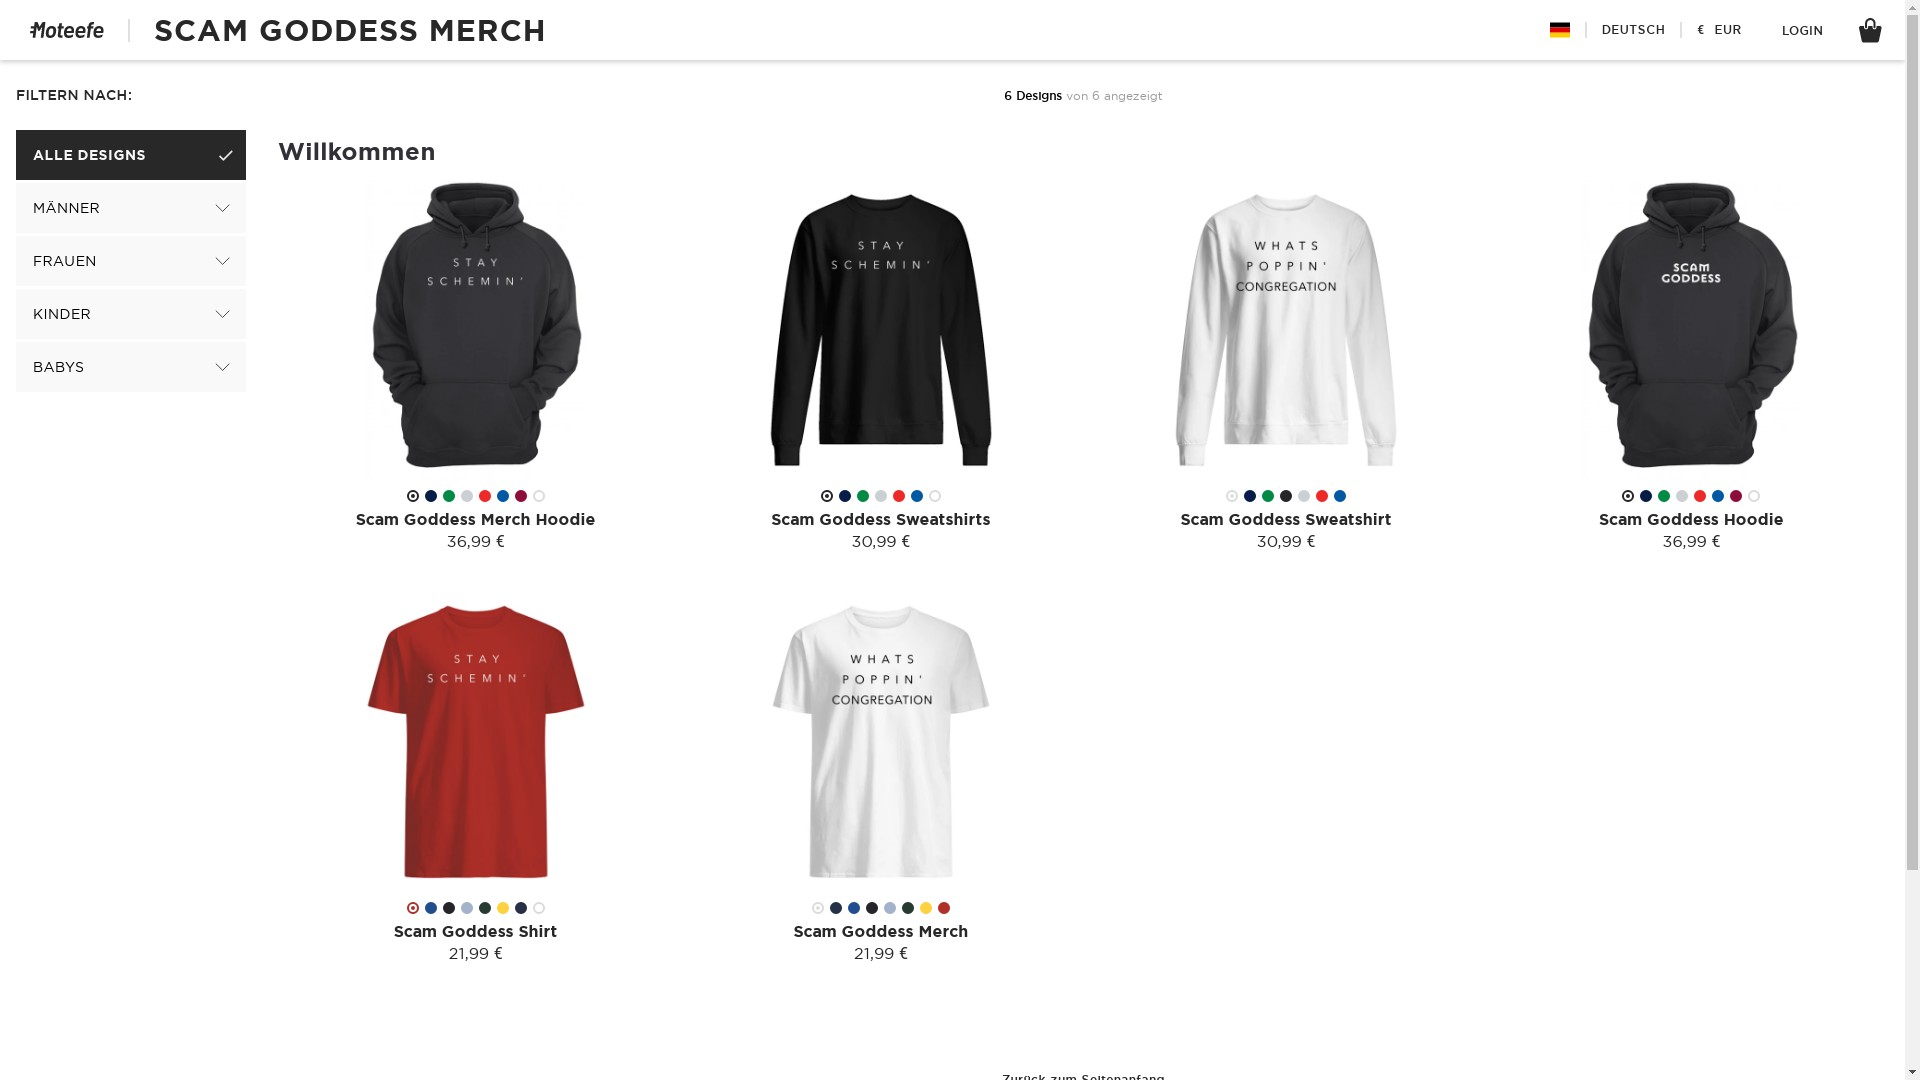 Scam Goddess Merch store located at moteefe.com/store/scam-goddess-merch